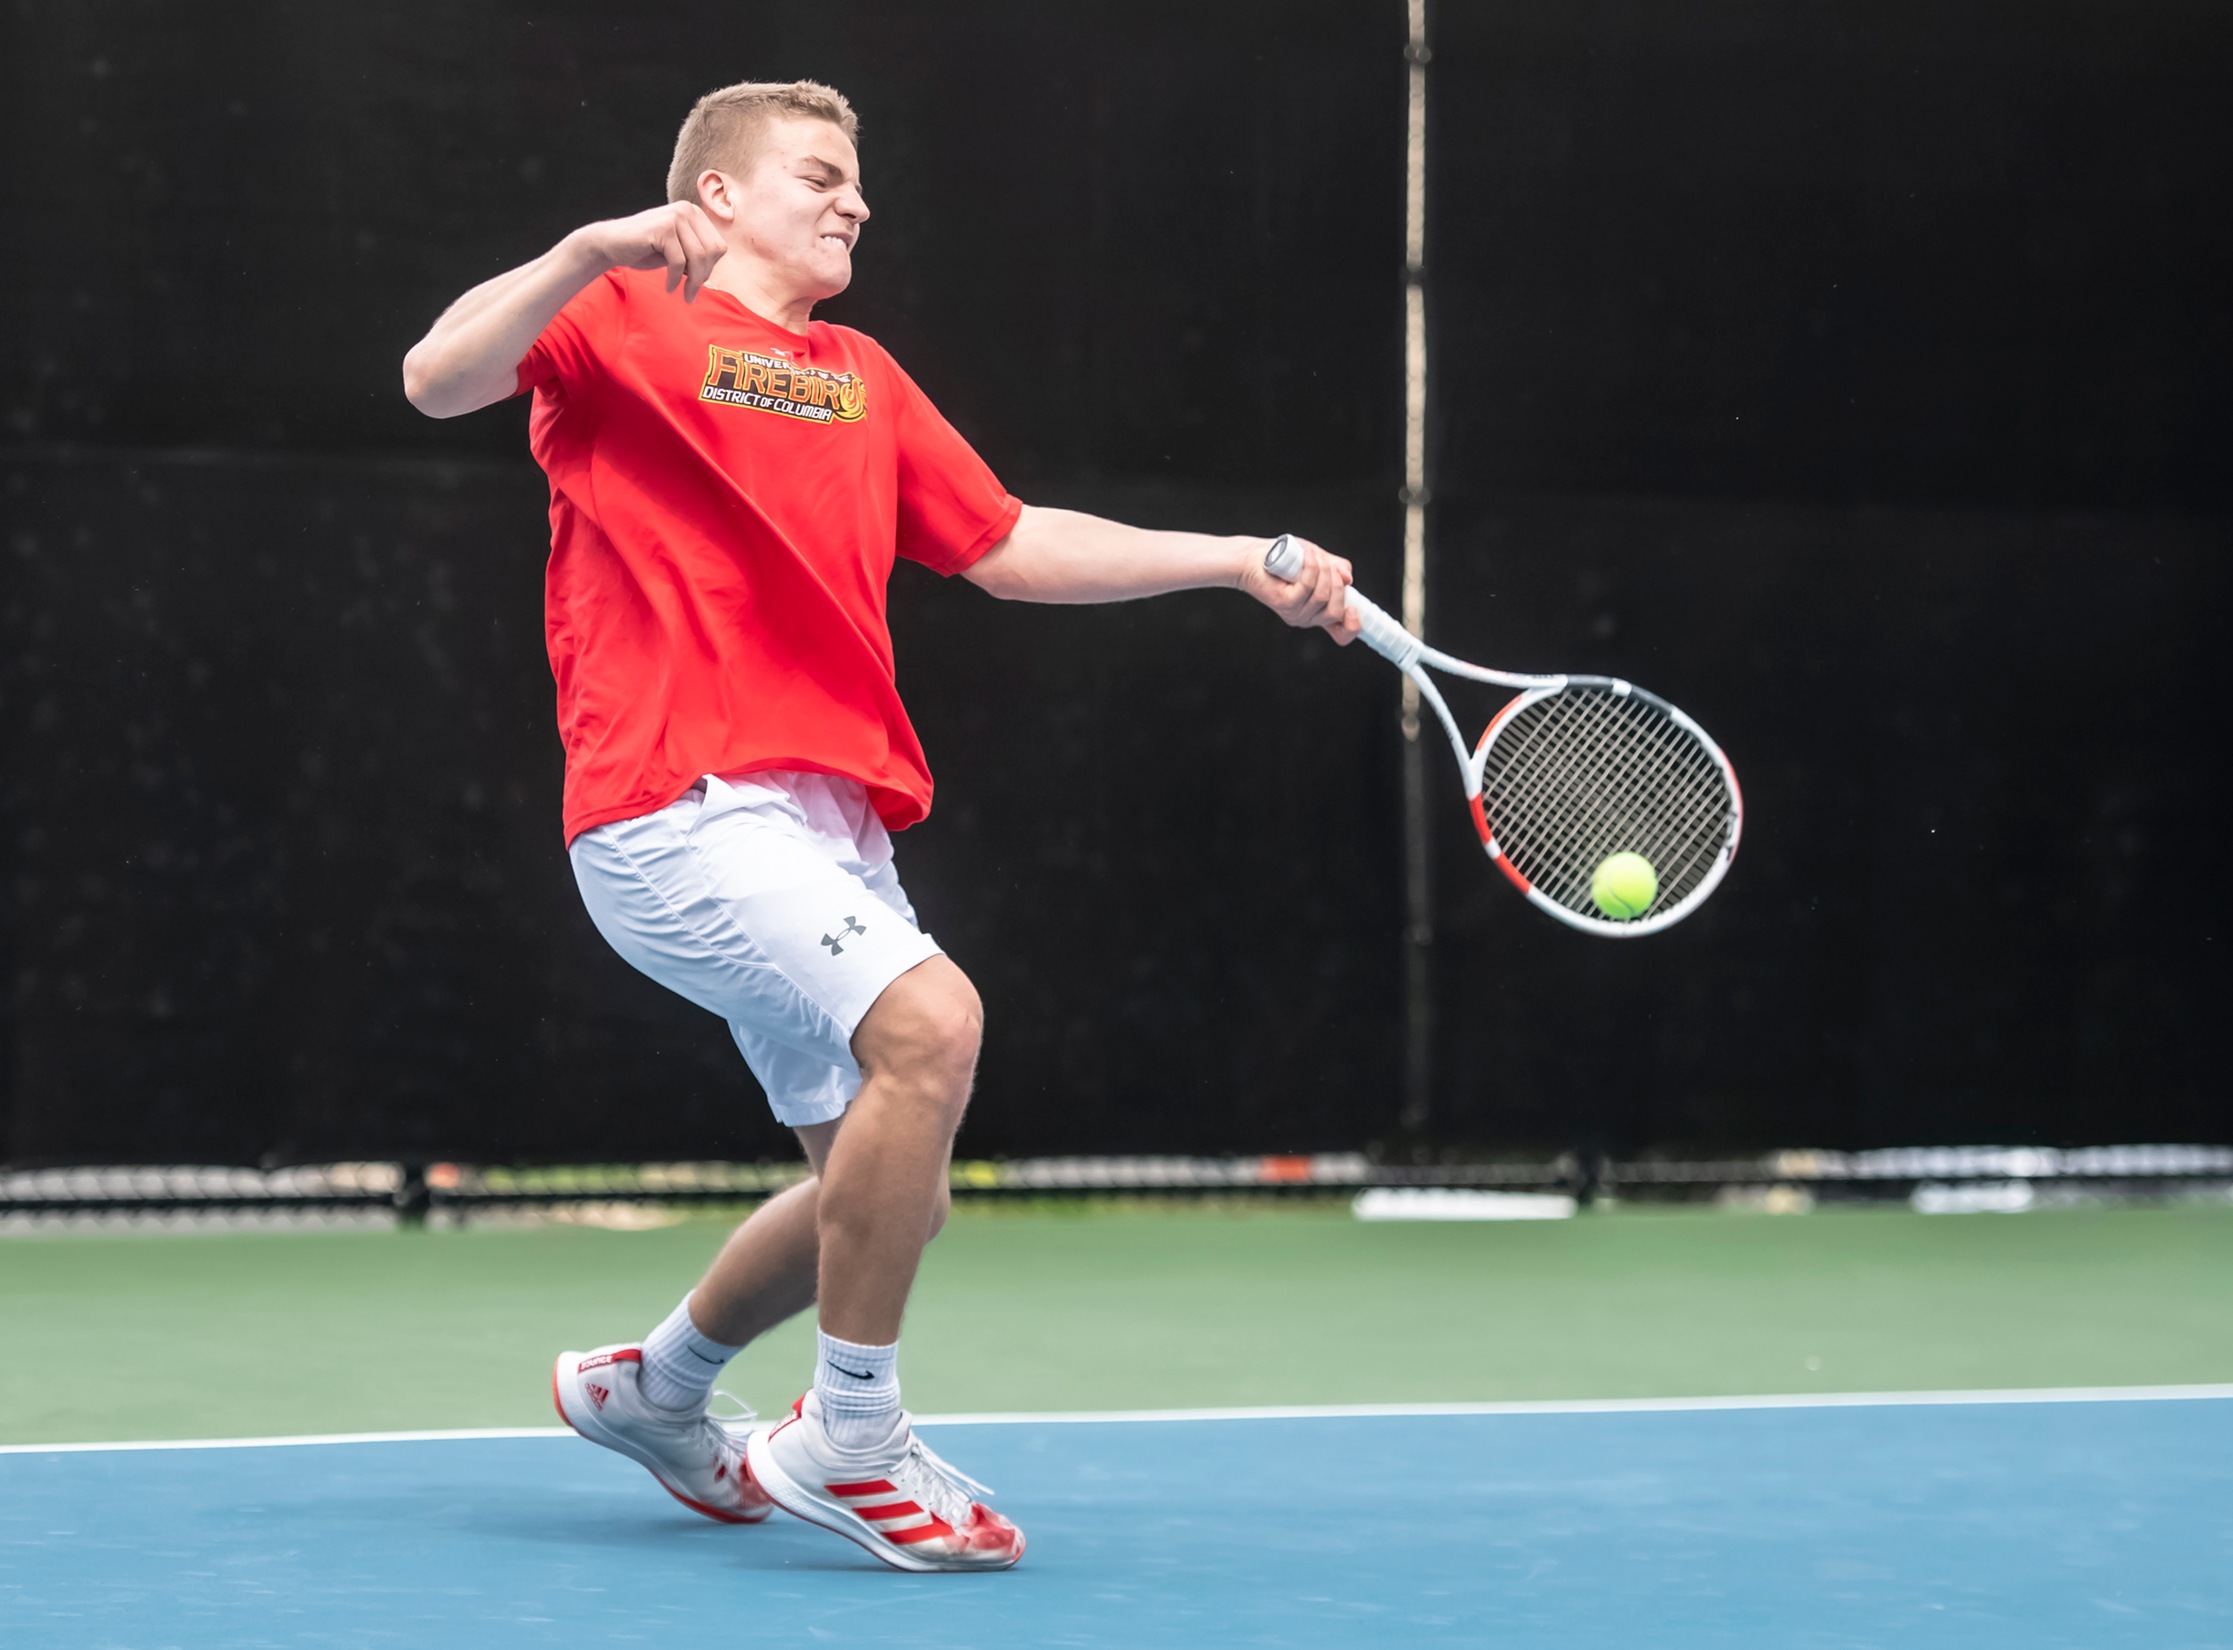 Maksim teamed up with Estevez Hernandez to give UDC their lone win in doubles play.